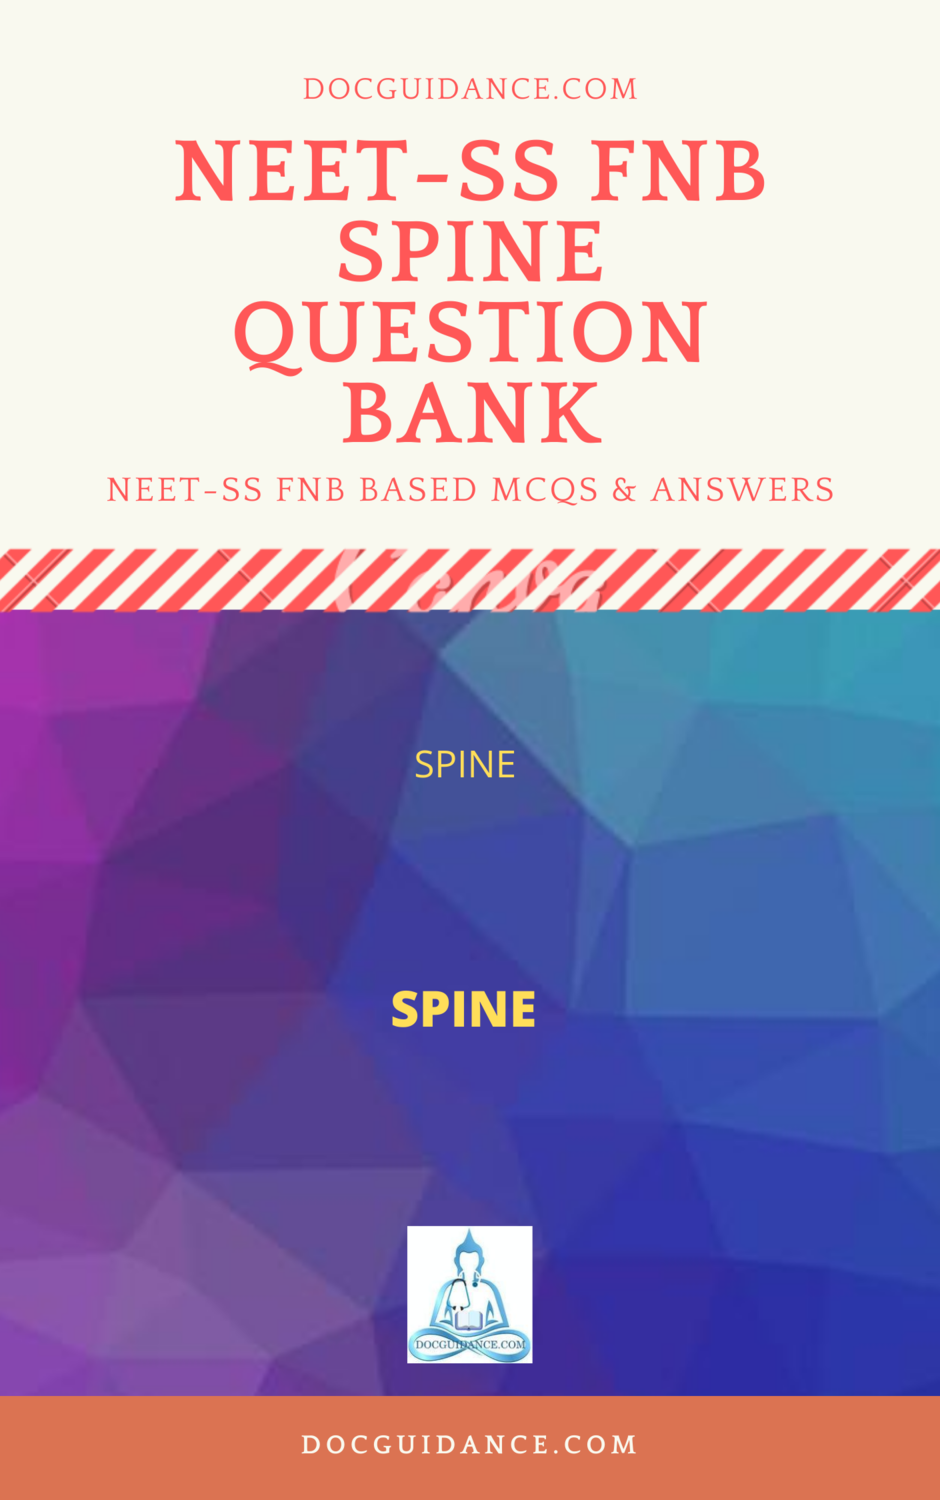 ​NEET SS FNB Spine Sugery Question bank